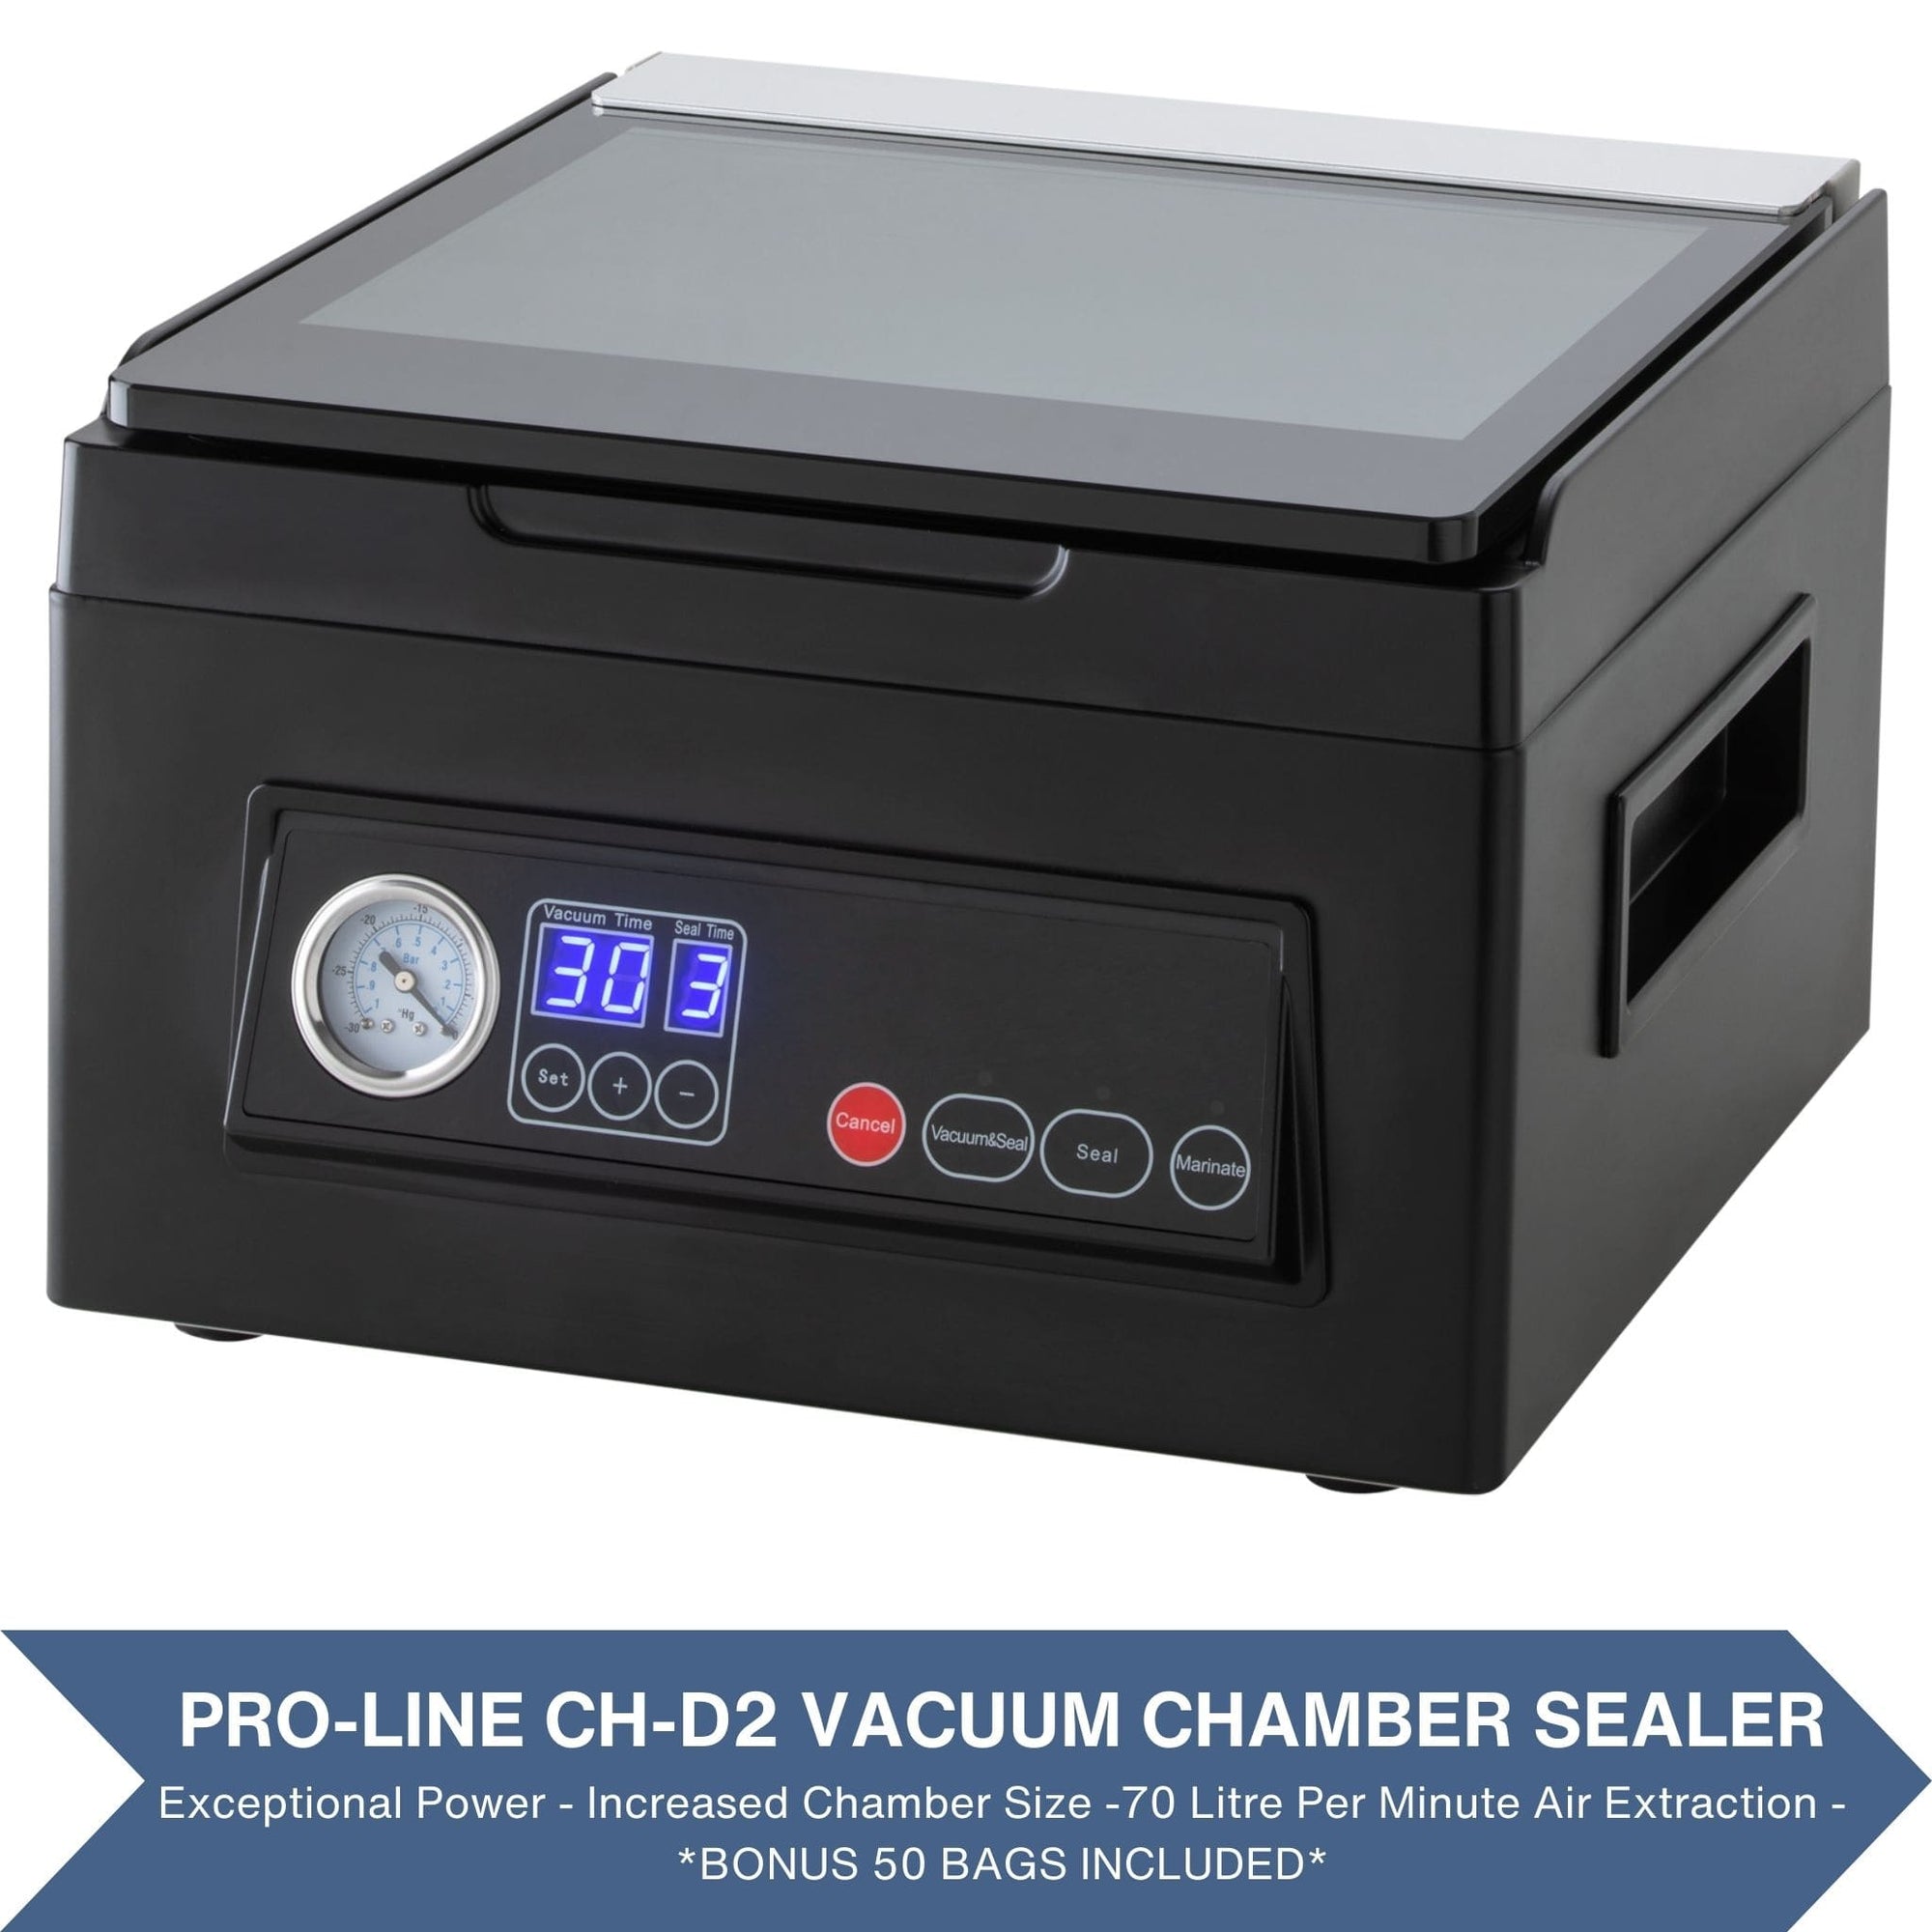 Pro-line VS-CHD2 Vacuum Chamber Sealer Cryovac Machine Front on View with Lid Closed Showing 50 Free Vacuum Sealer Bags INcluded.